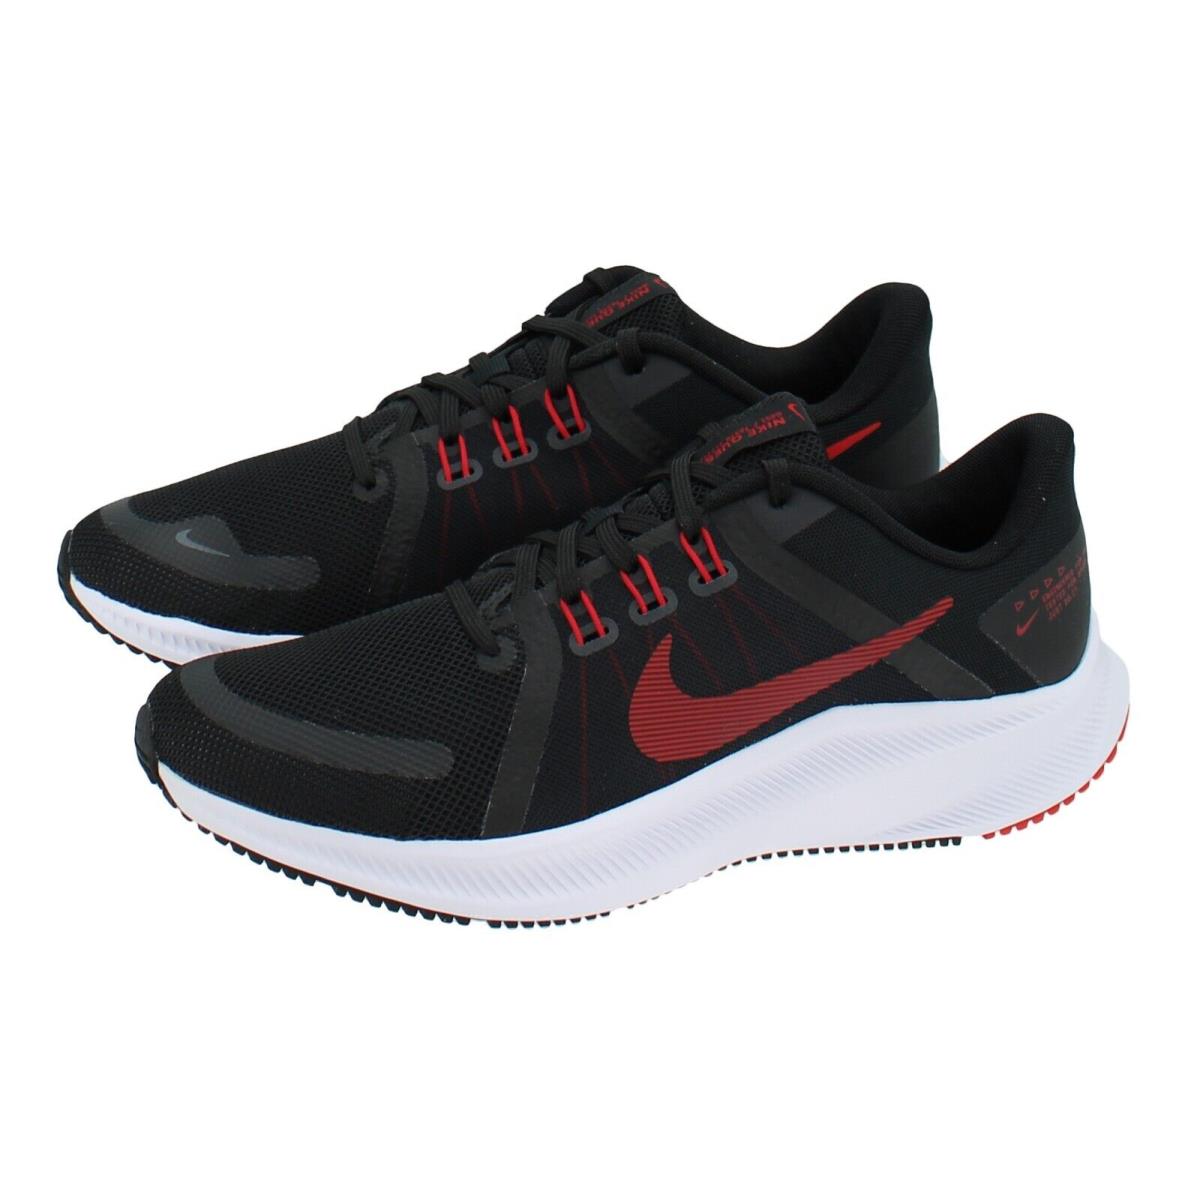 Nike Men`s Quest 4 Sneakers DA1105 Lightweight Cushioned Road Running Gym Shoes Black